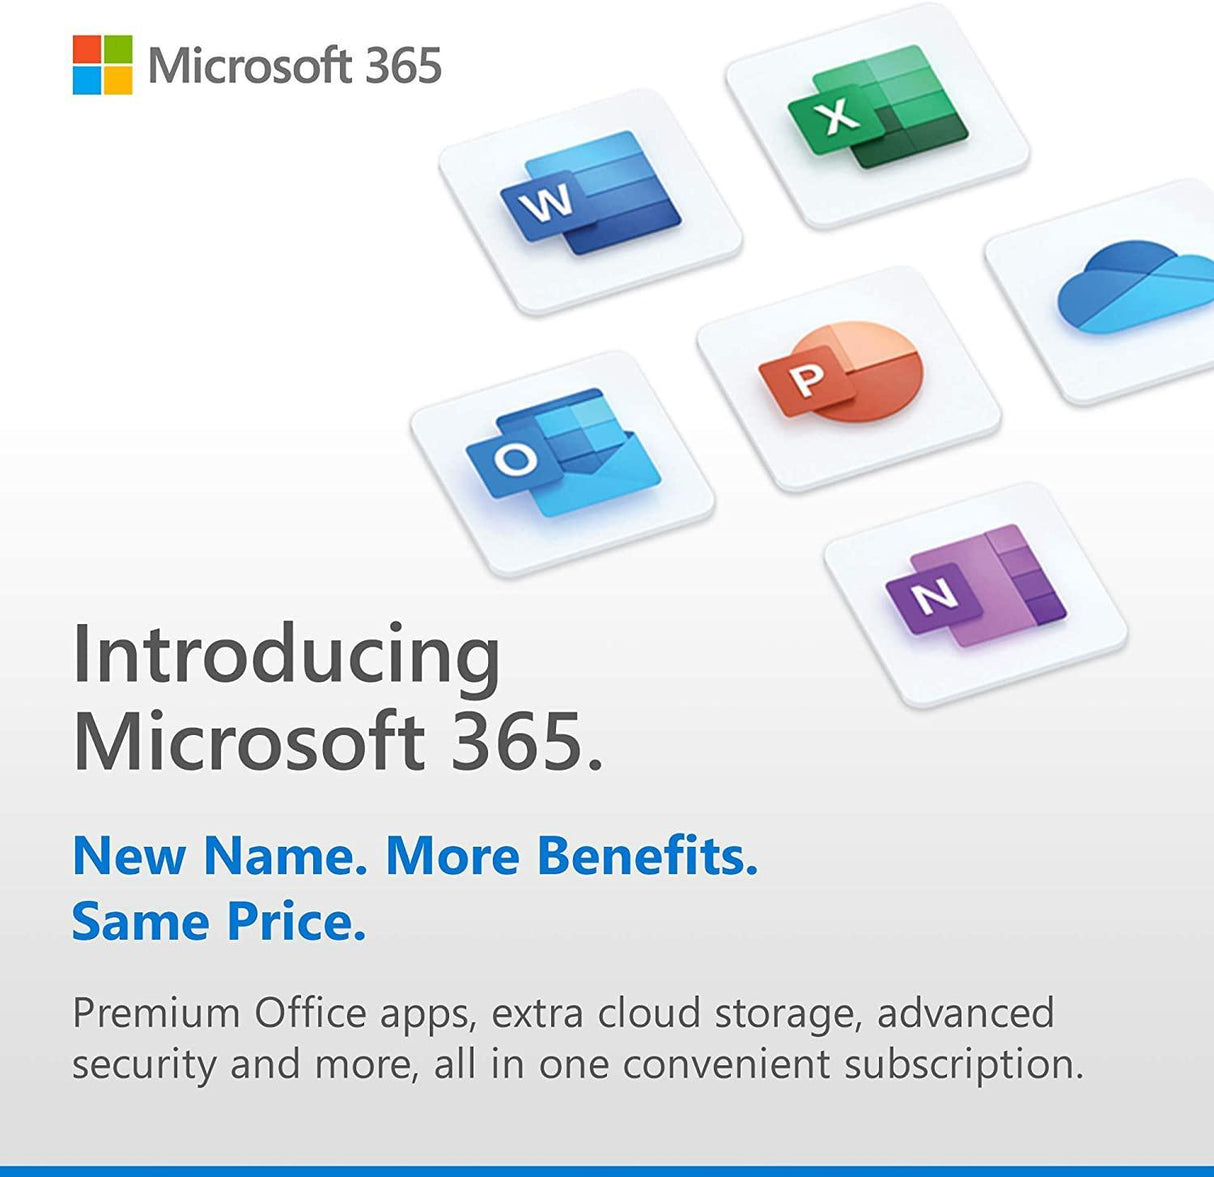 Microsoft Office 365 Personal - Instant Download for Windows and Mac (1 User) - SoftwareCW - Authorized Reseller